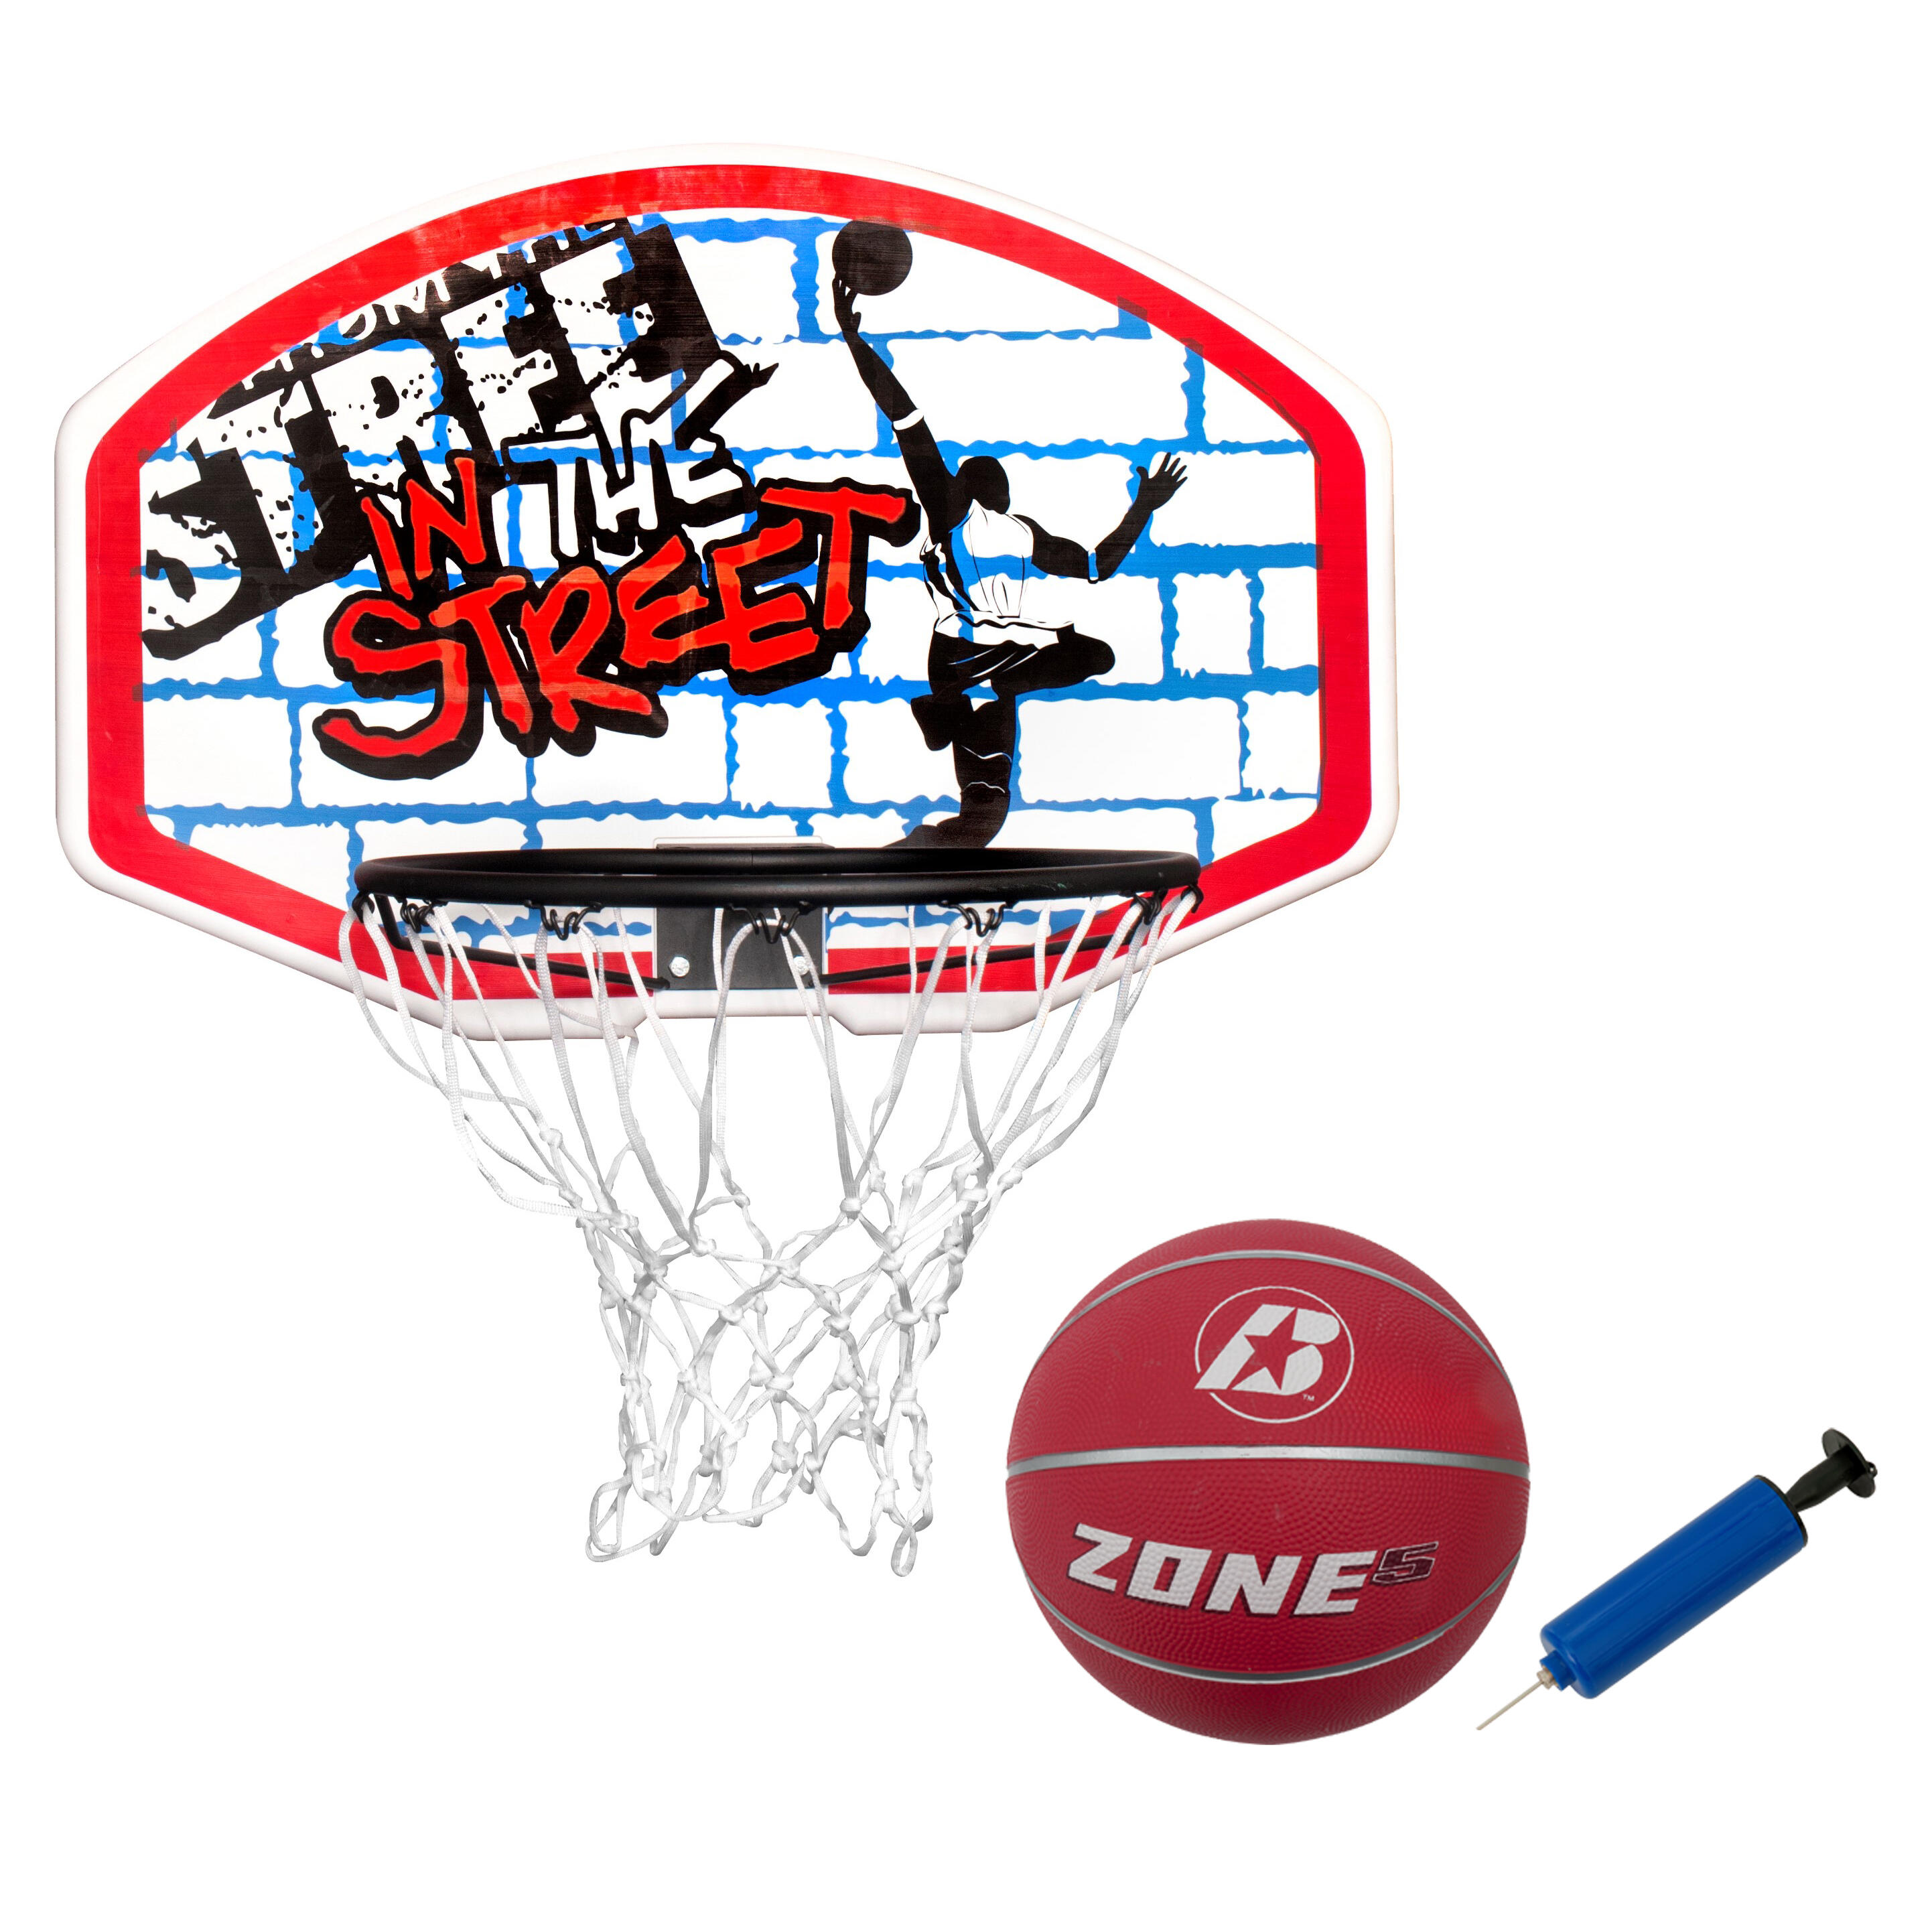 SURE SHOT ‘In the Street’ Backboard and Ring Wall Mount Set